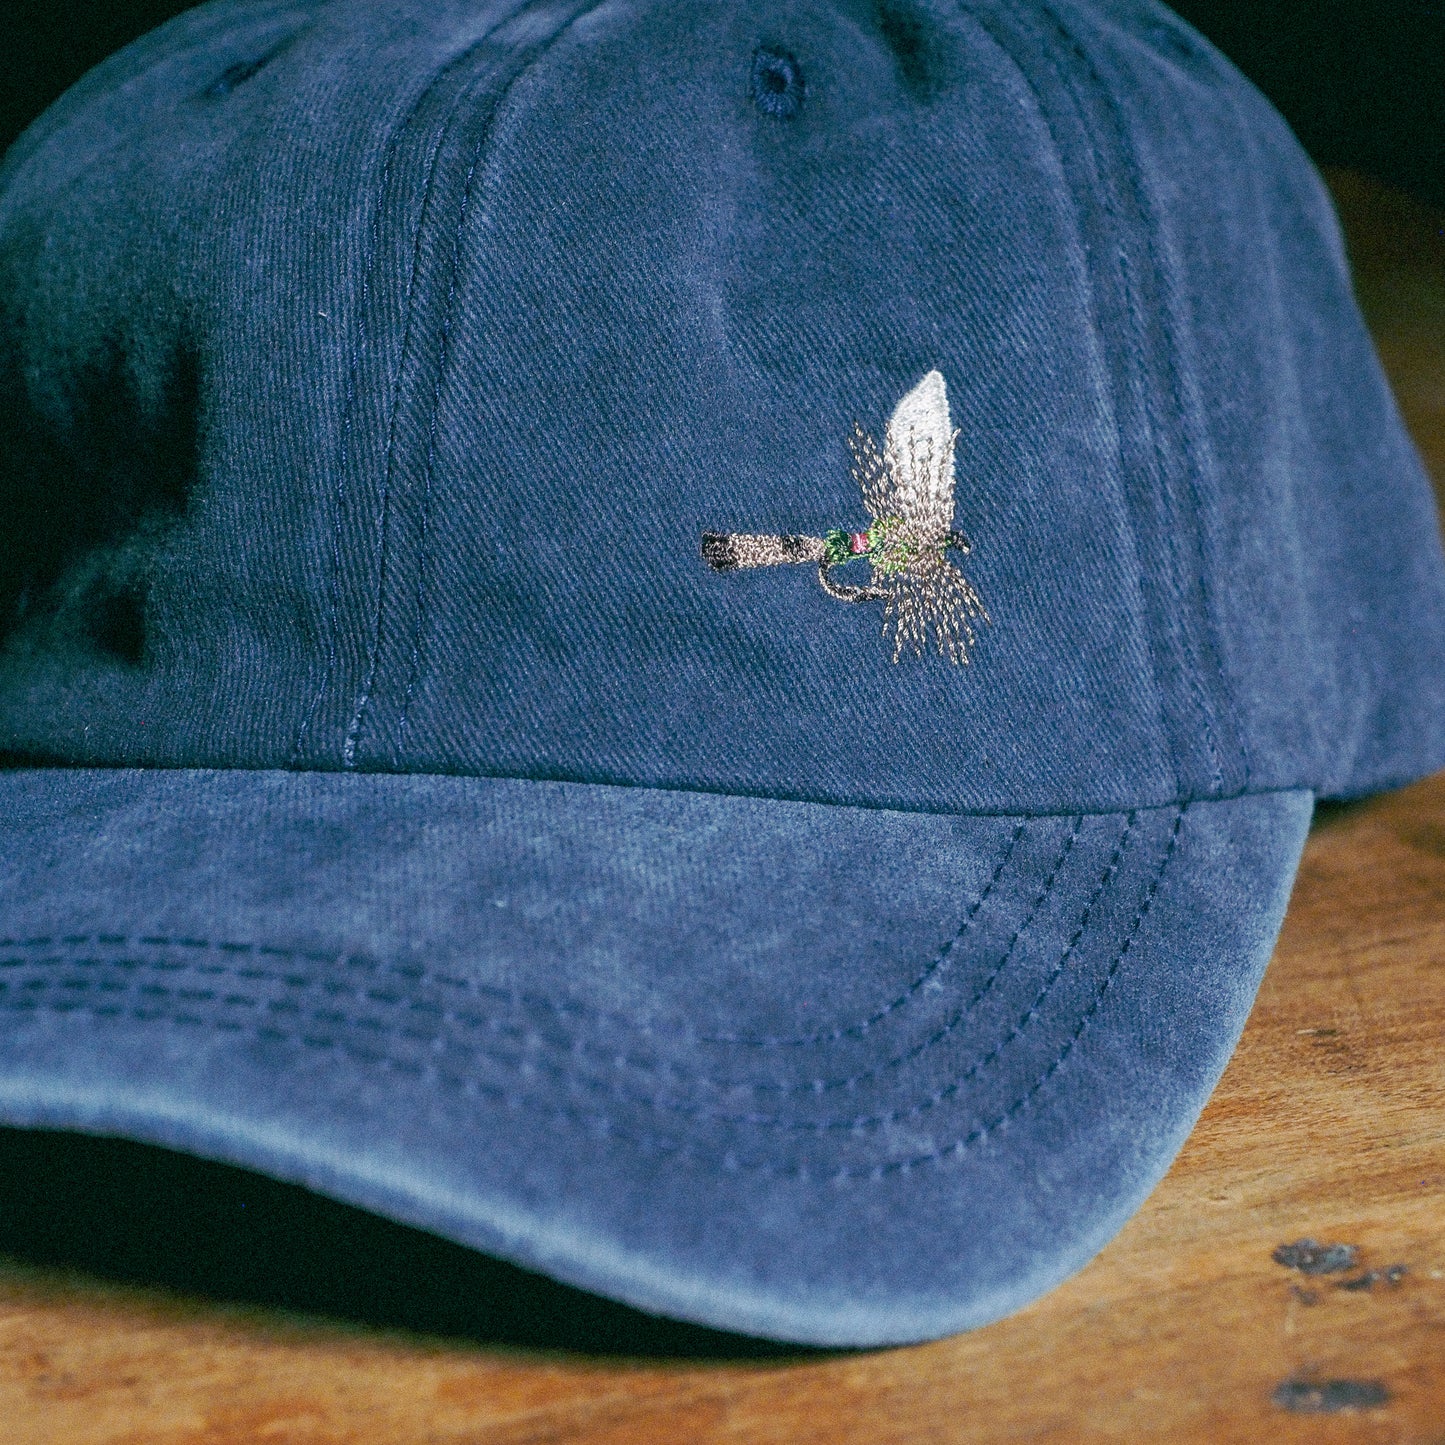 Dry Fly Dad Hat